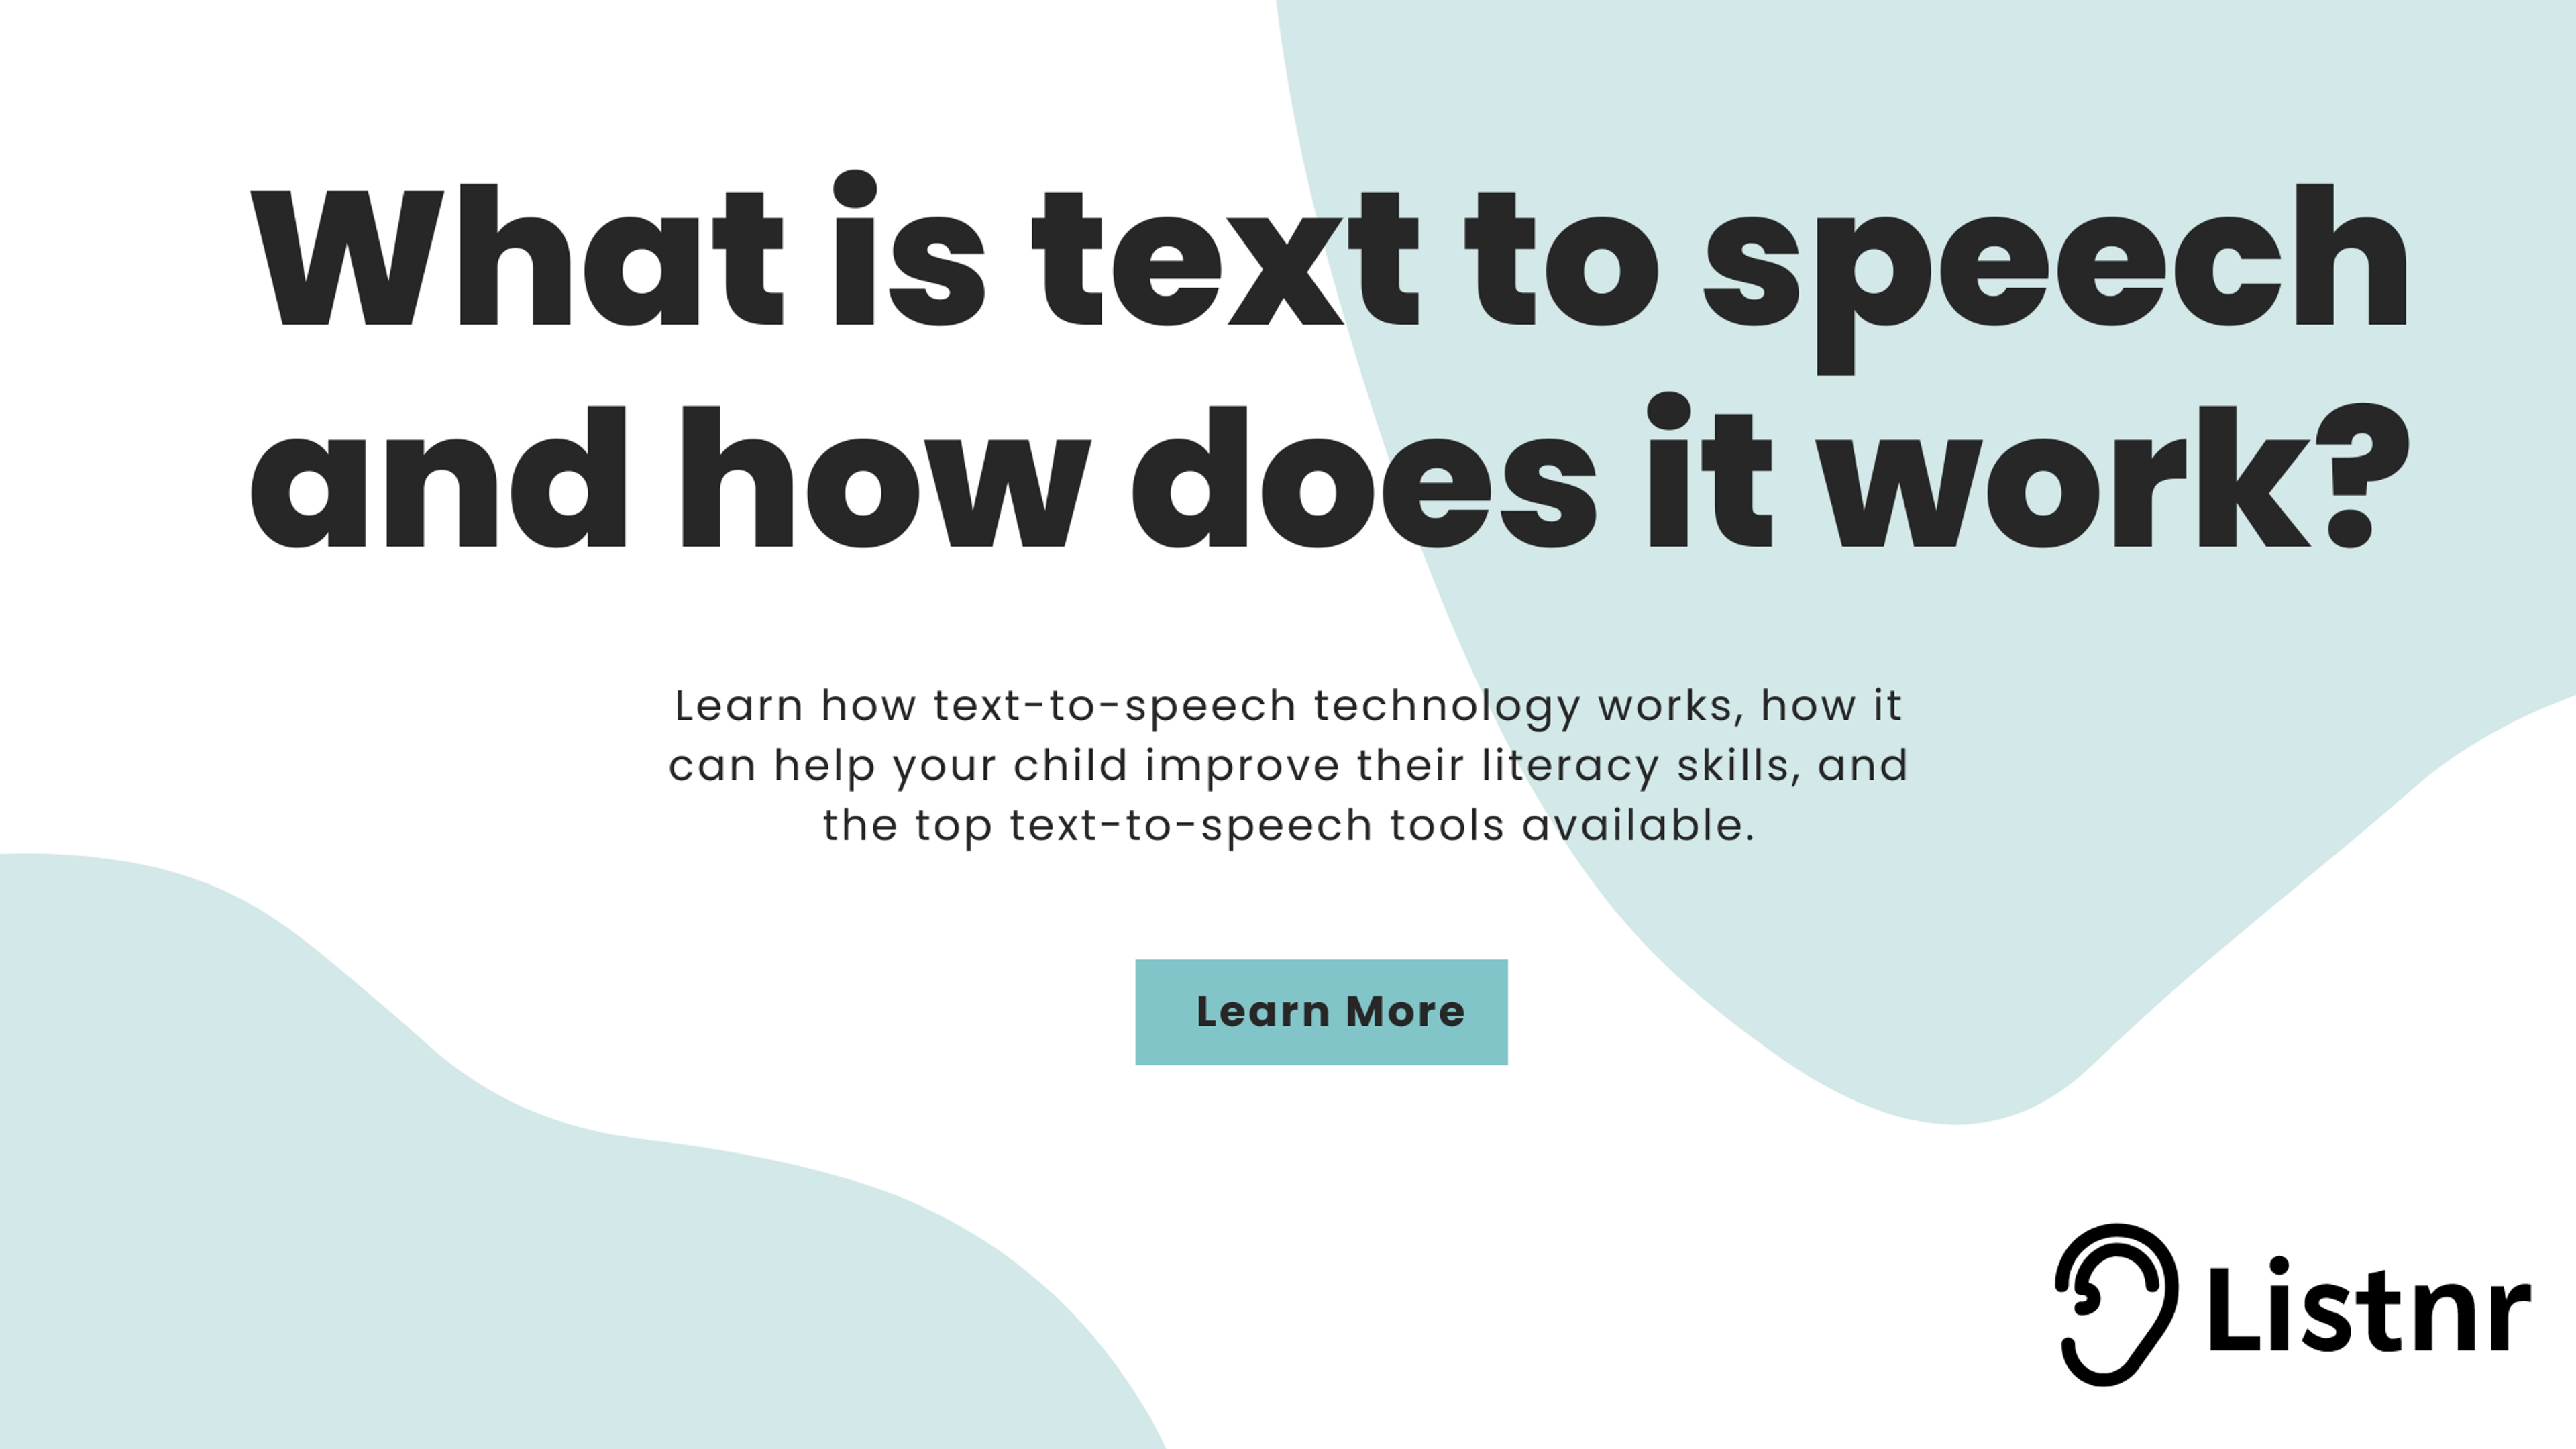 What is text to speech and how does it work?